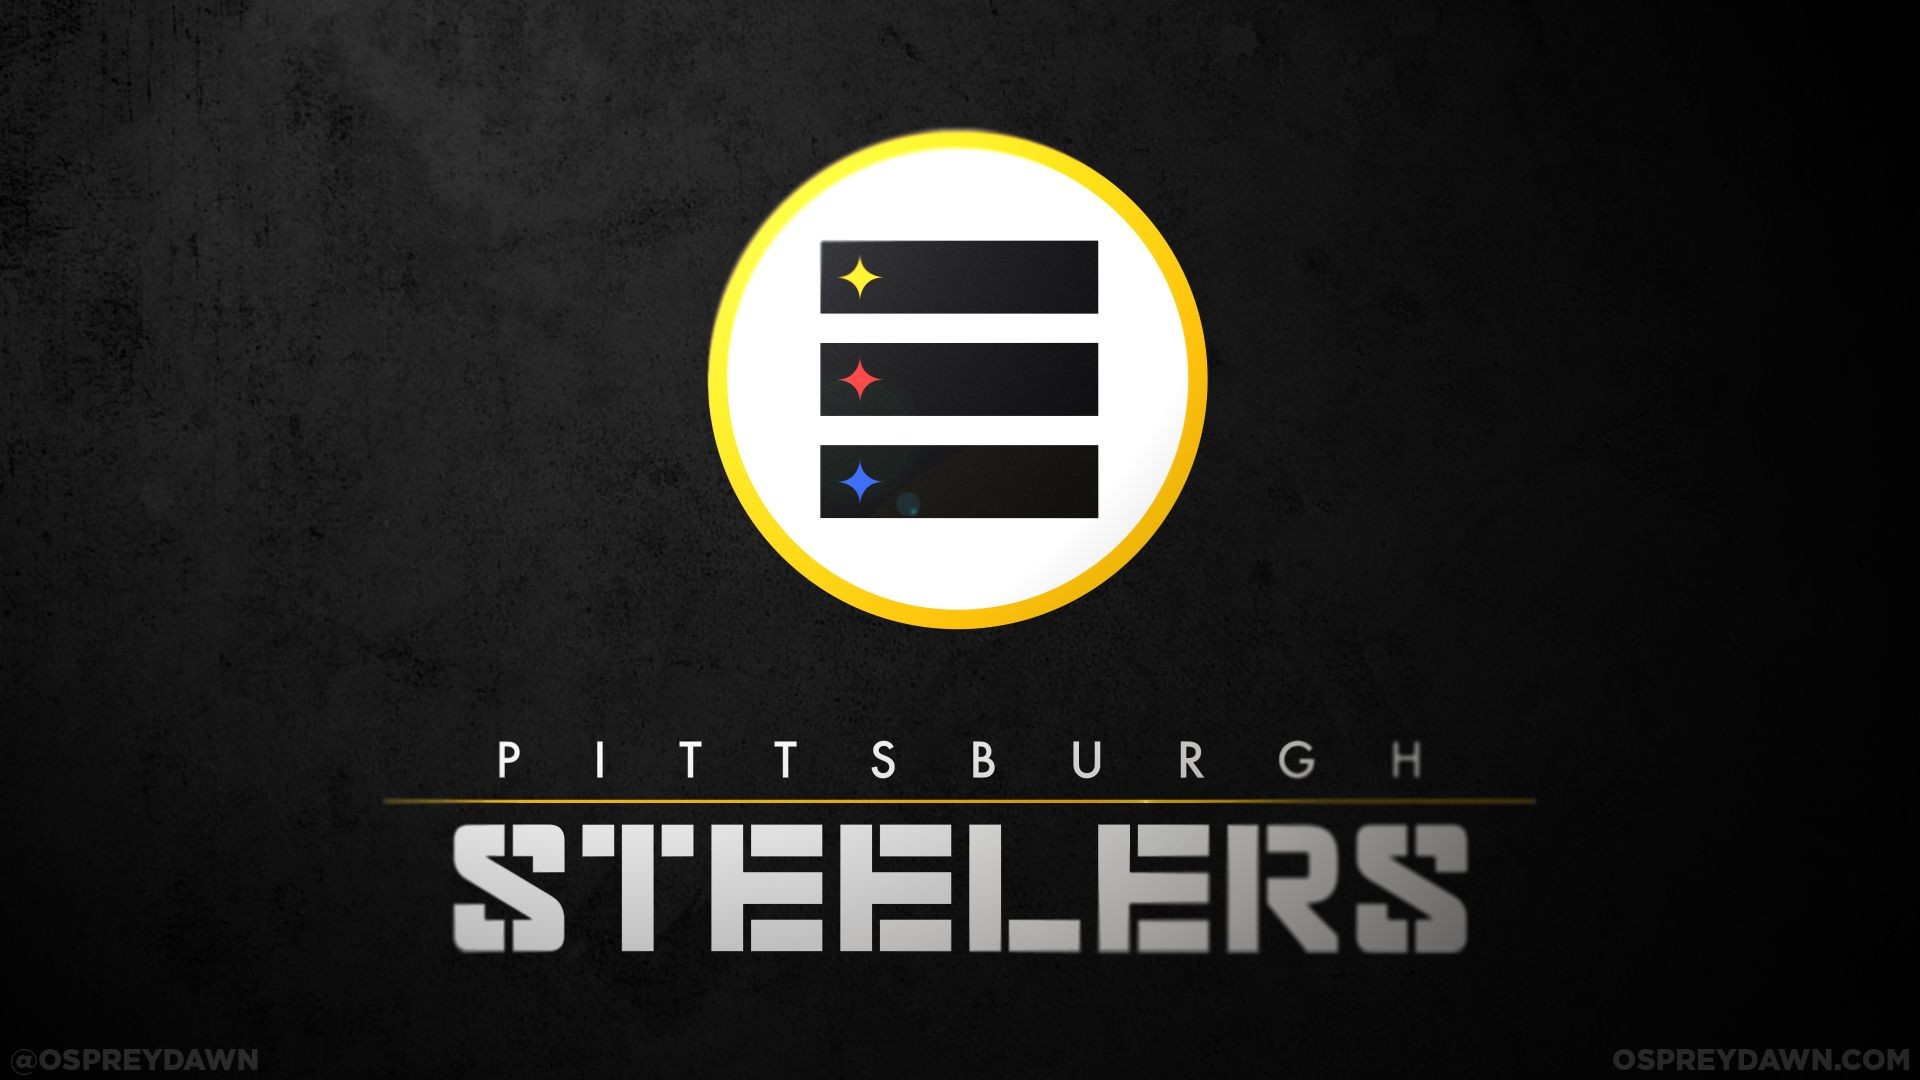 1920x1080 Redesigned Pittsburgh Steelers logo is...what?